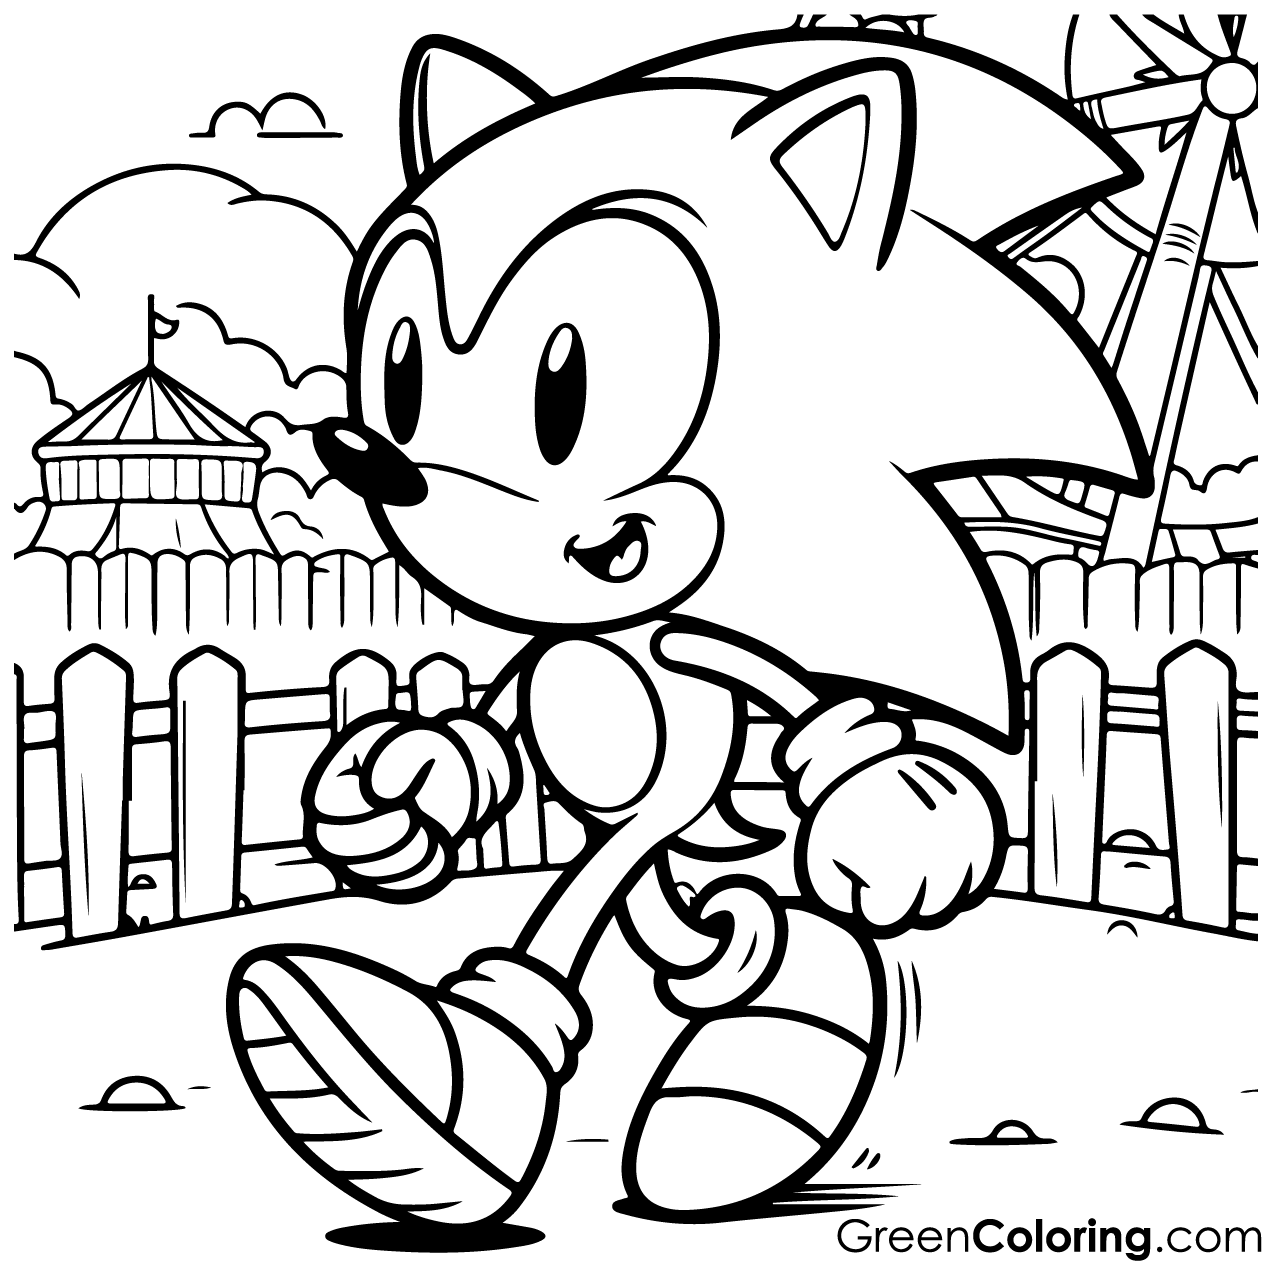 60 Must-Have Super Sonic Coloring Pages: Free Printable PDFs